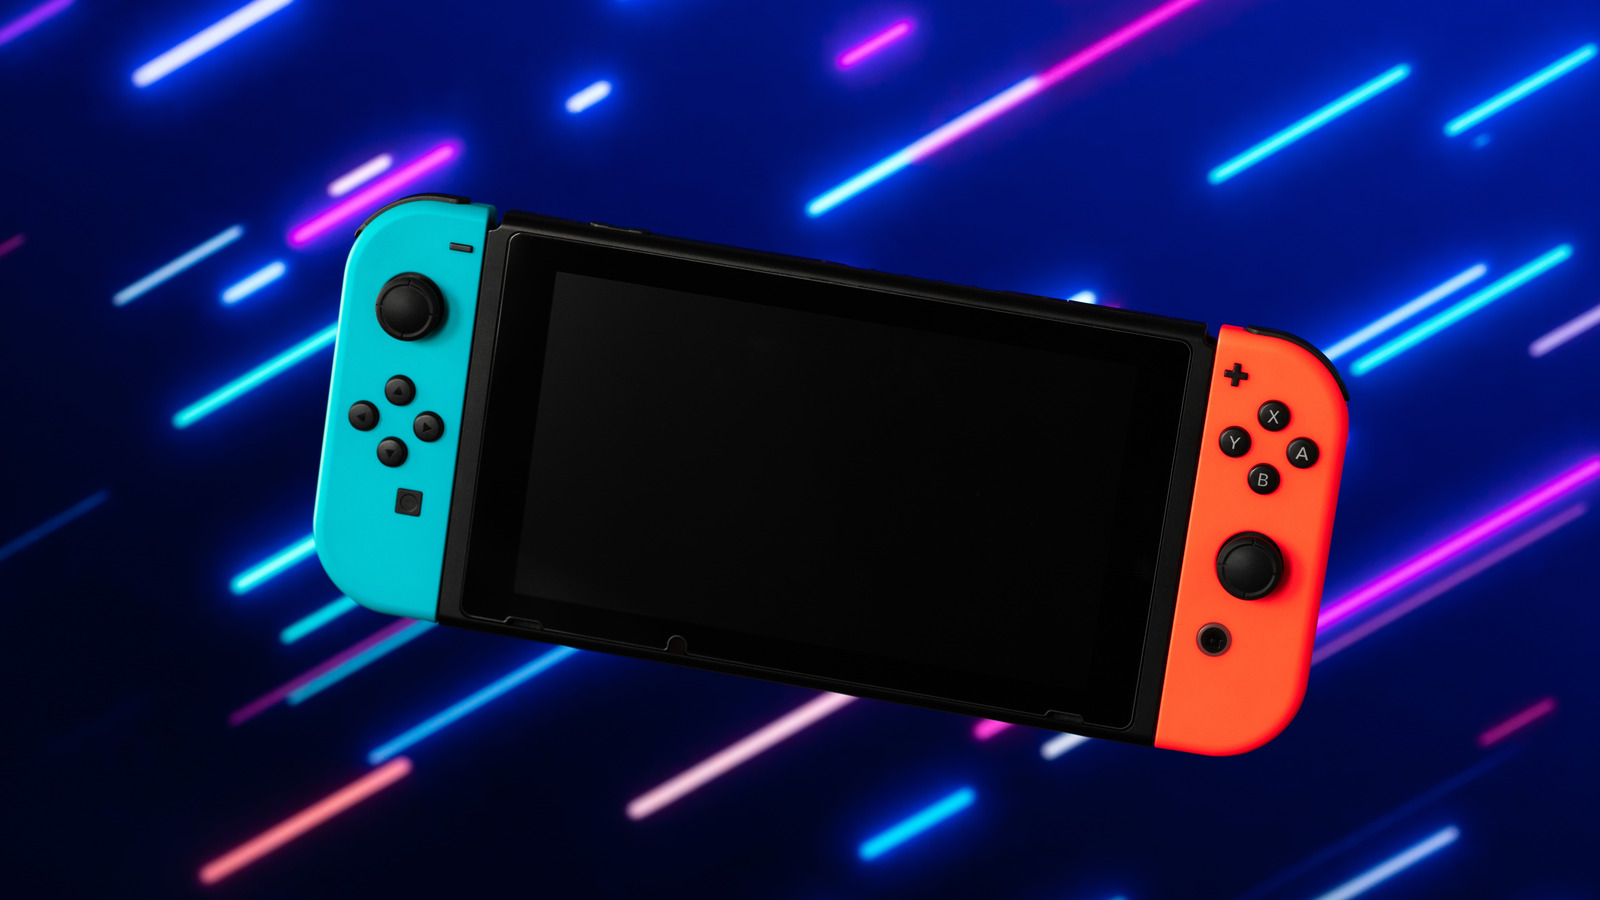 The New Nintendo OLED Switch Is a Small but Punchy Upgrade